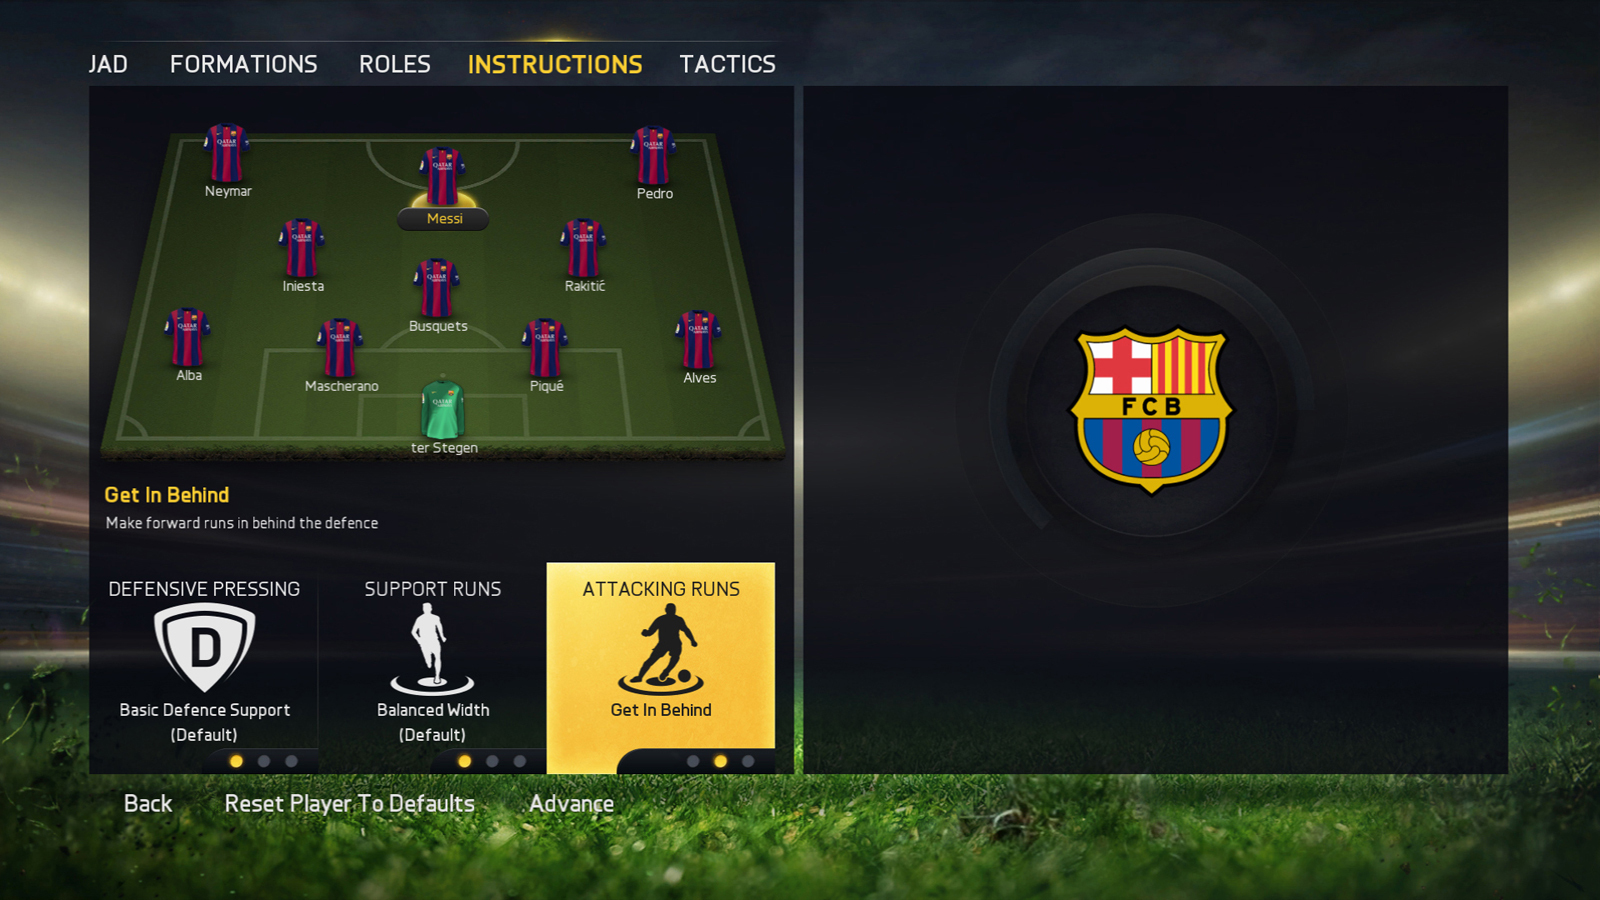 Six things you need to know about FIFA 15 Ultimate Team